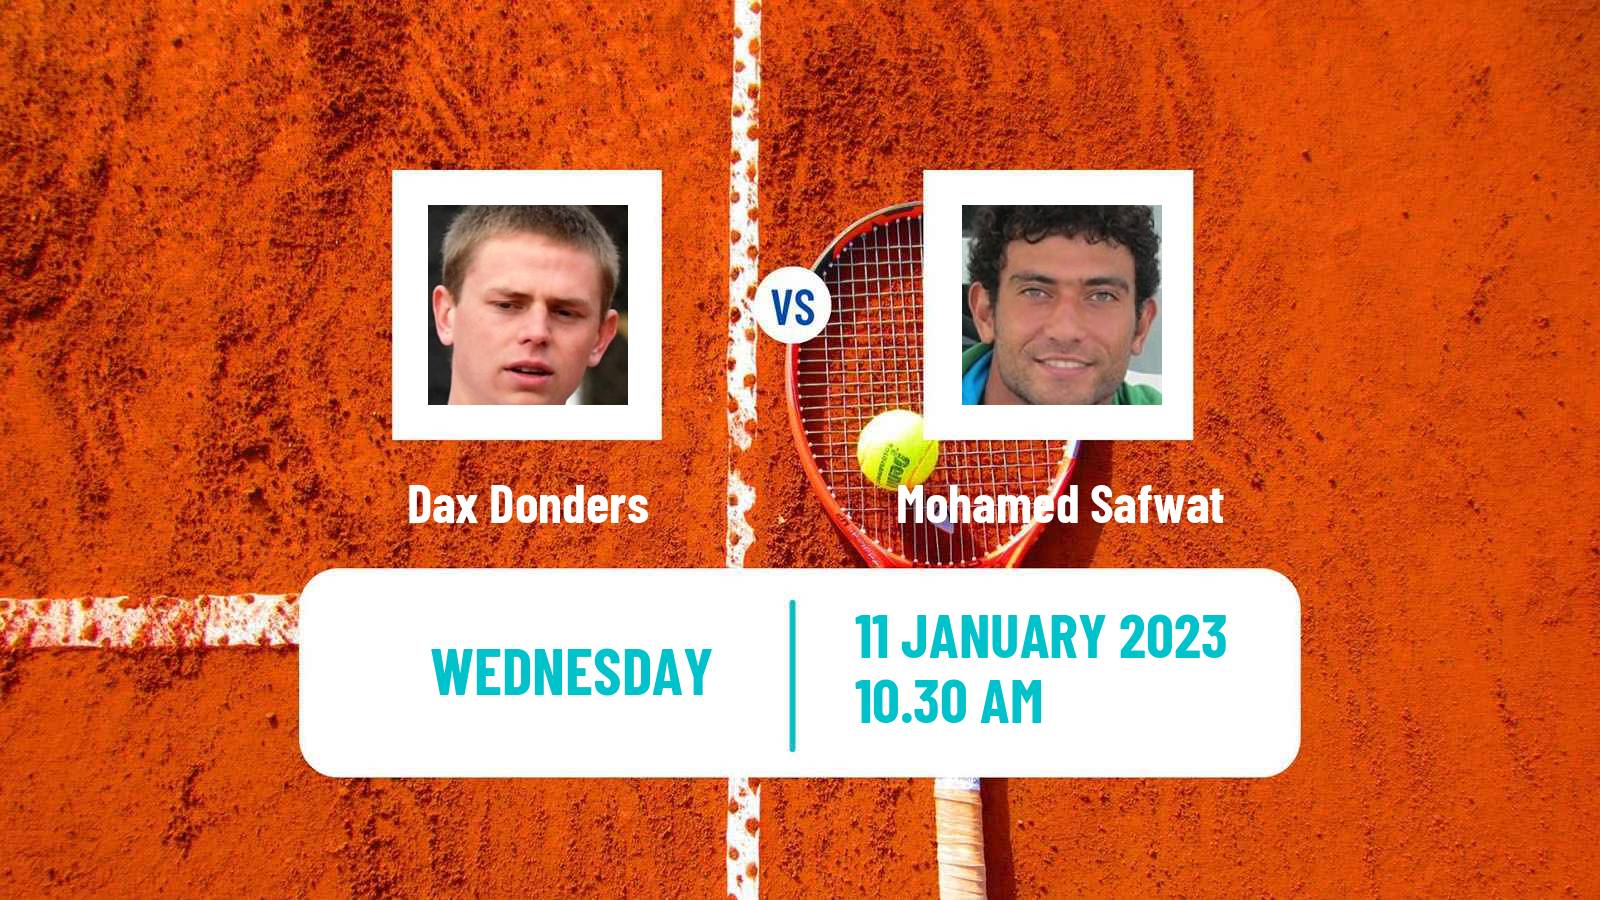 Tennis ITF Tournaments Dax Donders - Mohamed Safwat